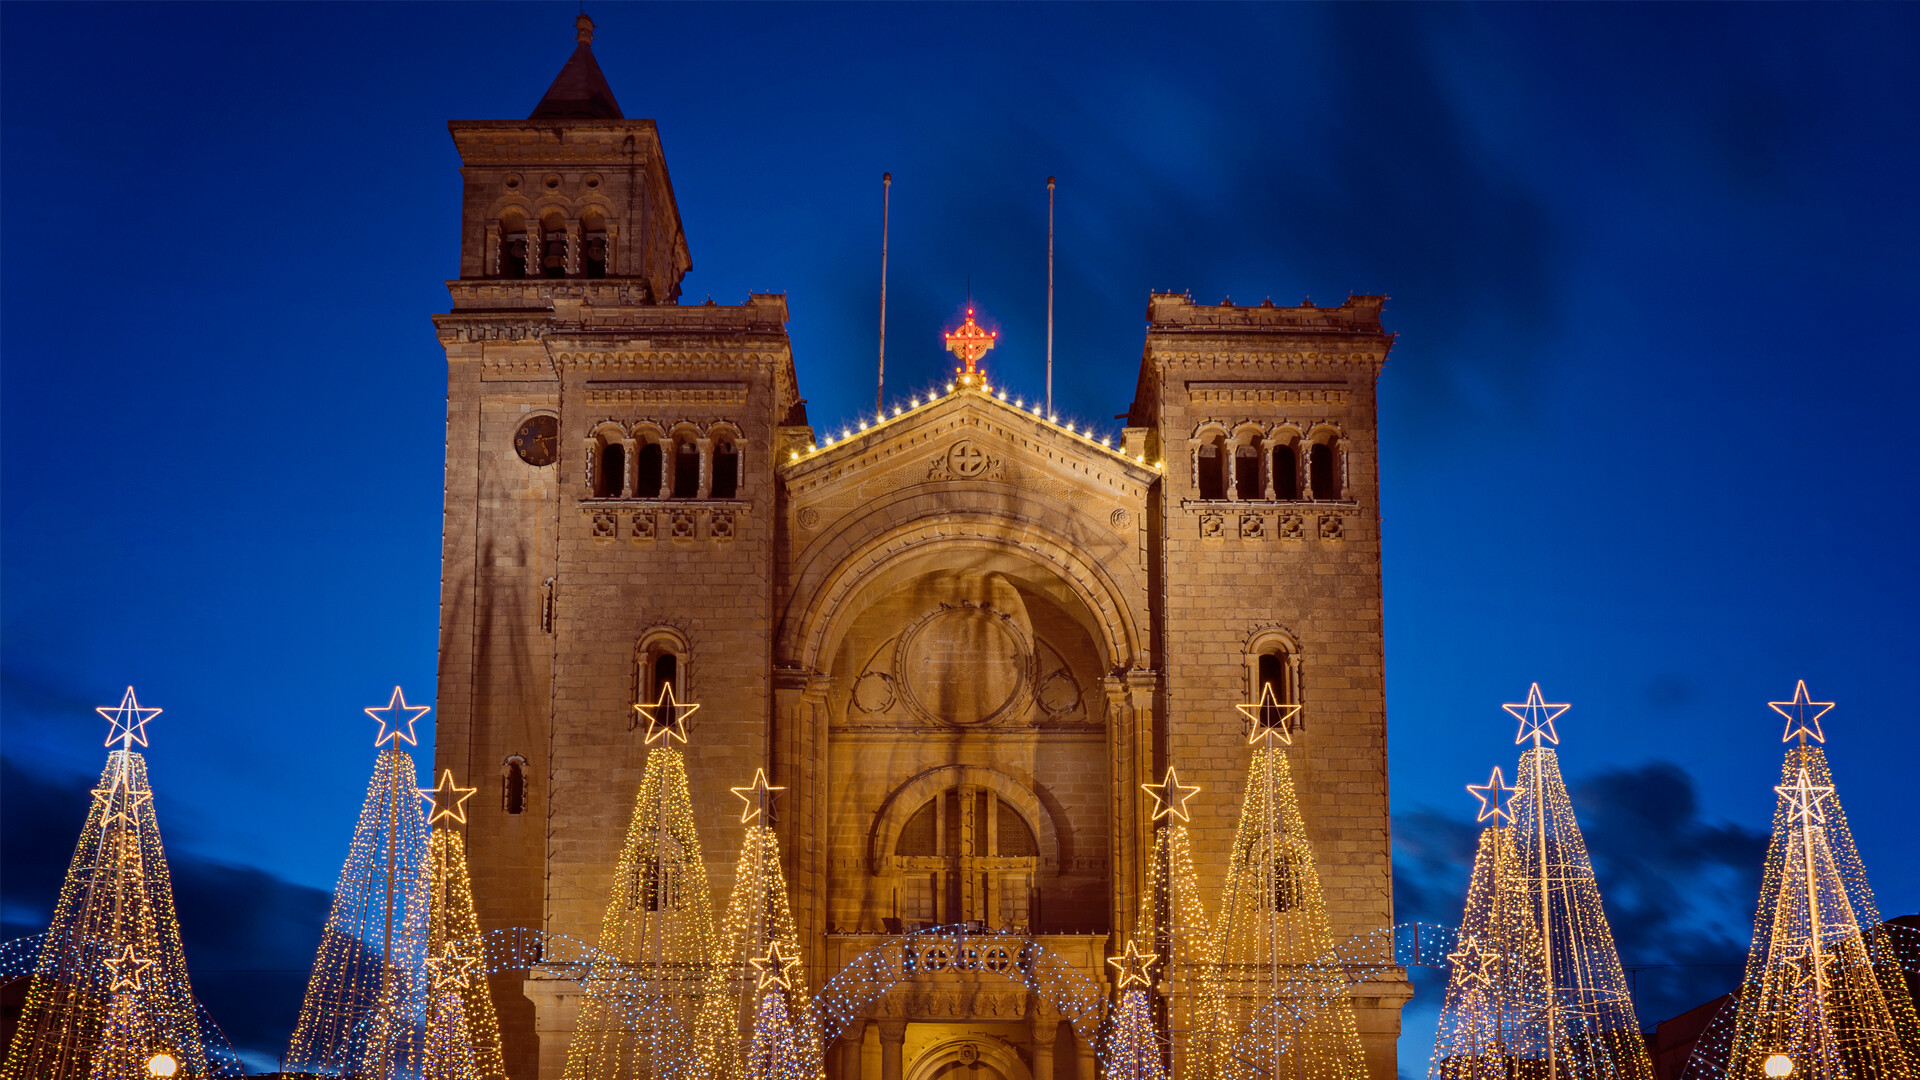 Church in Malta during Christmas time